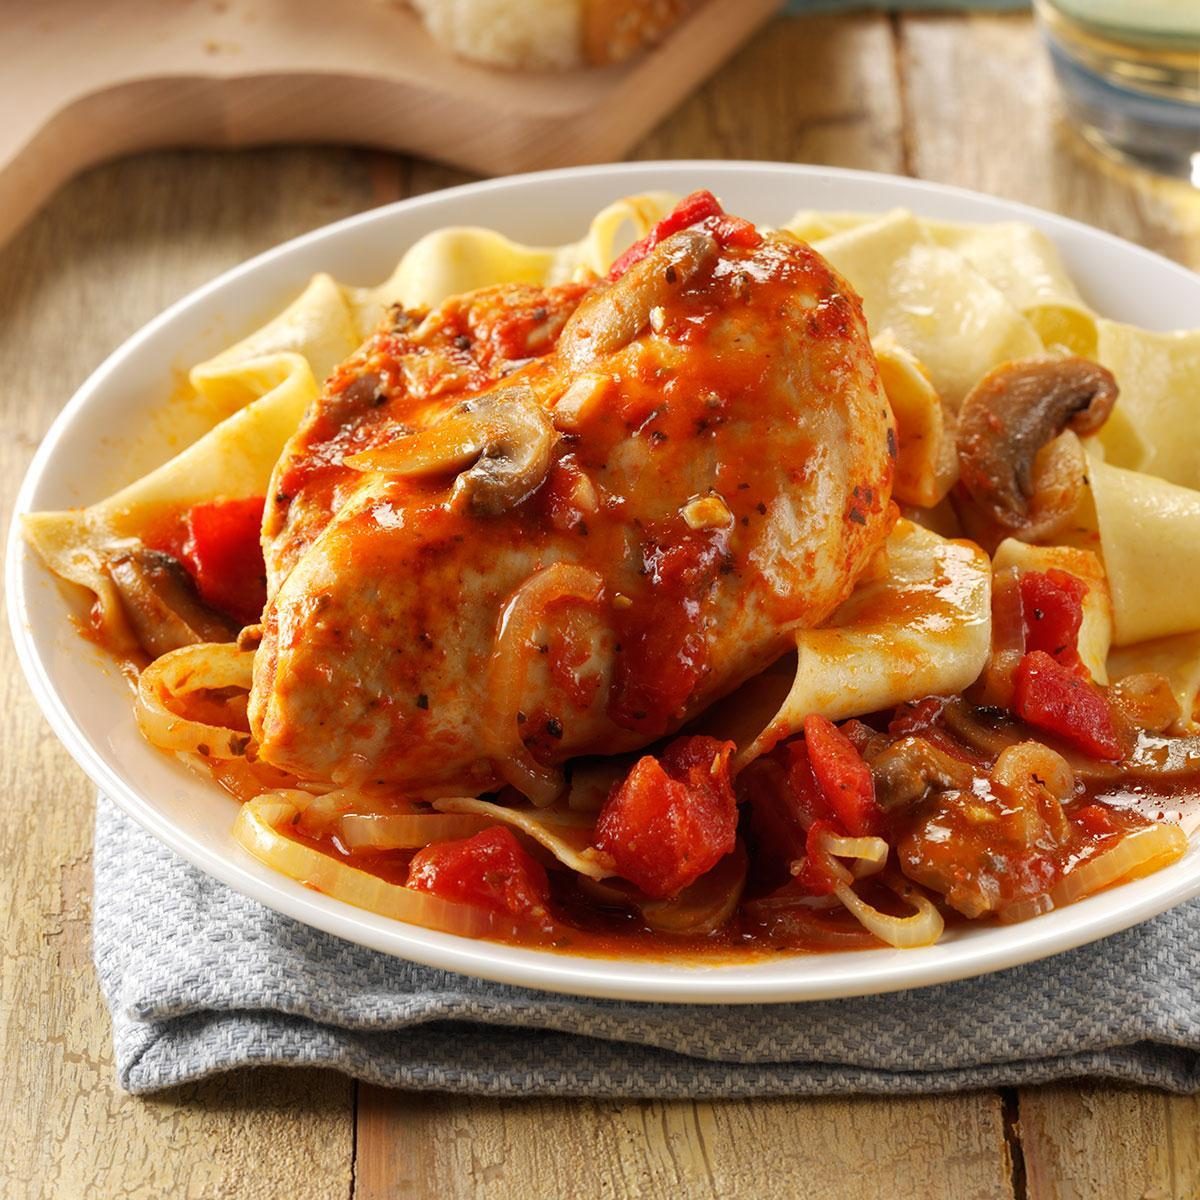 How To Cook Chicken Cacciatore In the T-Fal Electric Pressure Cooker